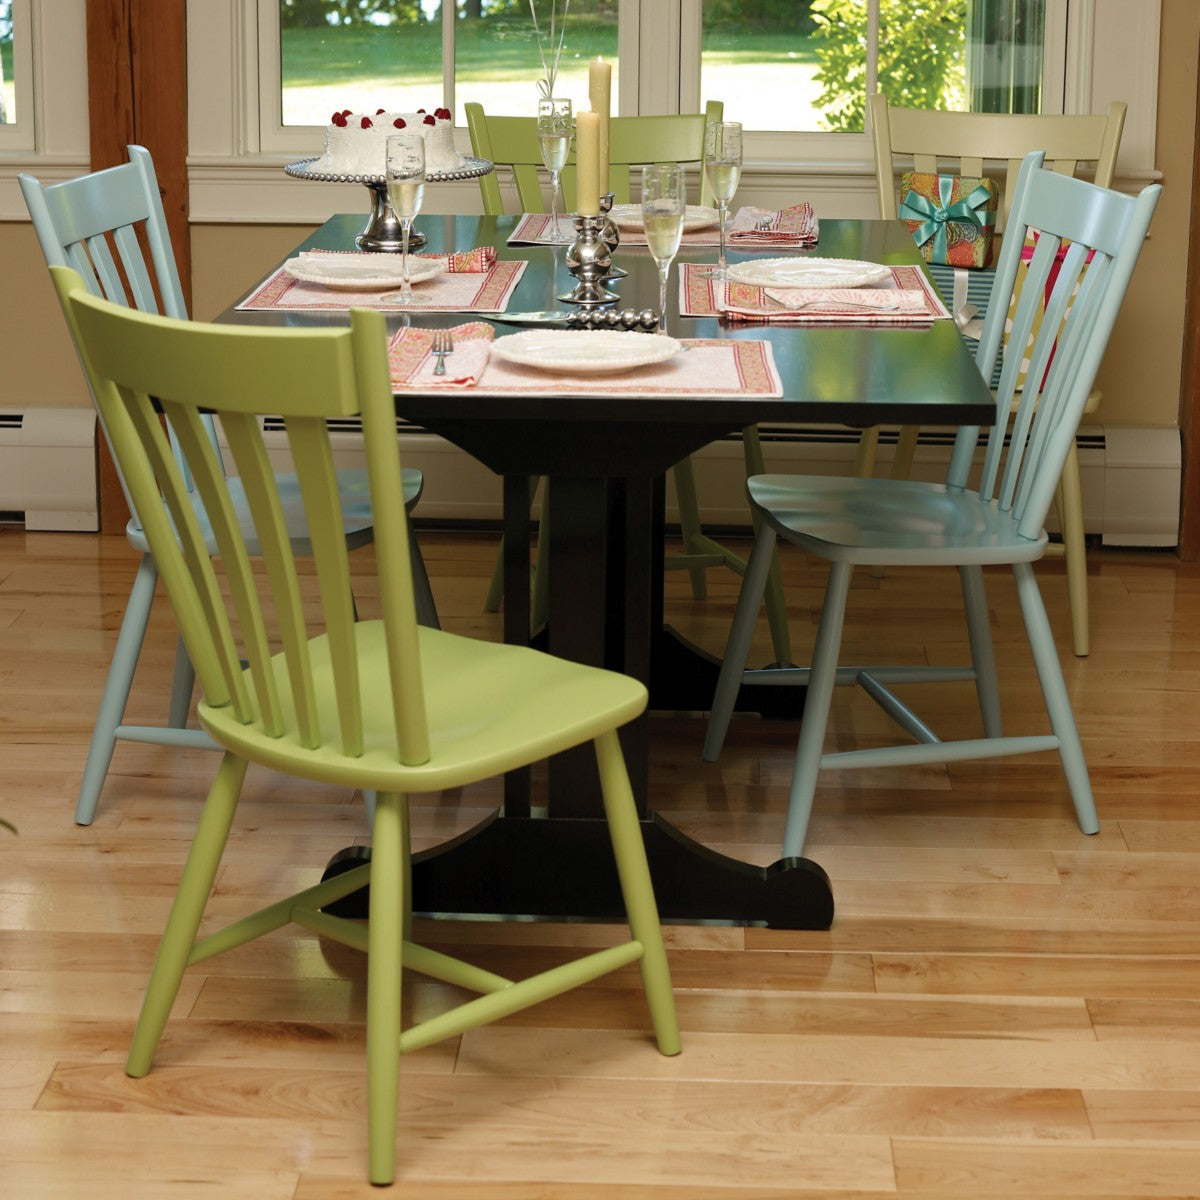 Maine Cottage Windsor Dining Chair & Seat Cushion | Maine Cottage 